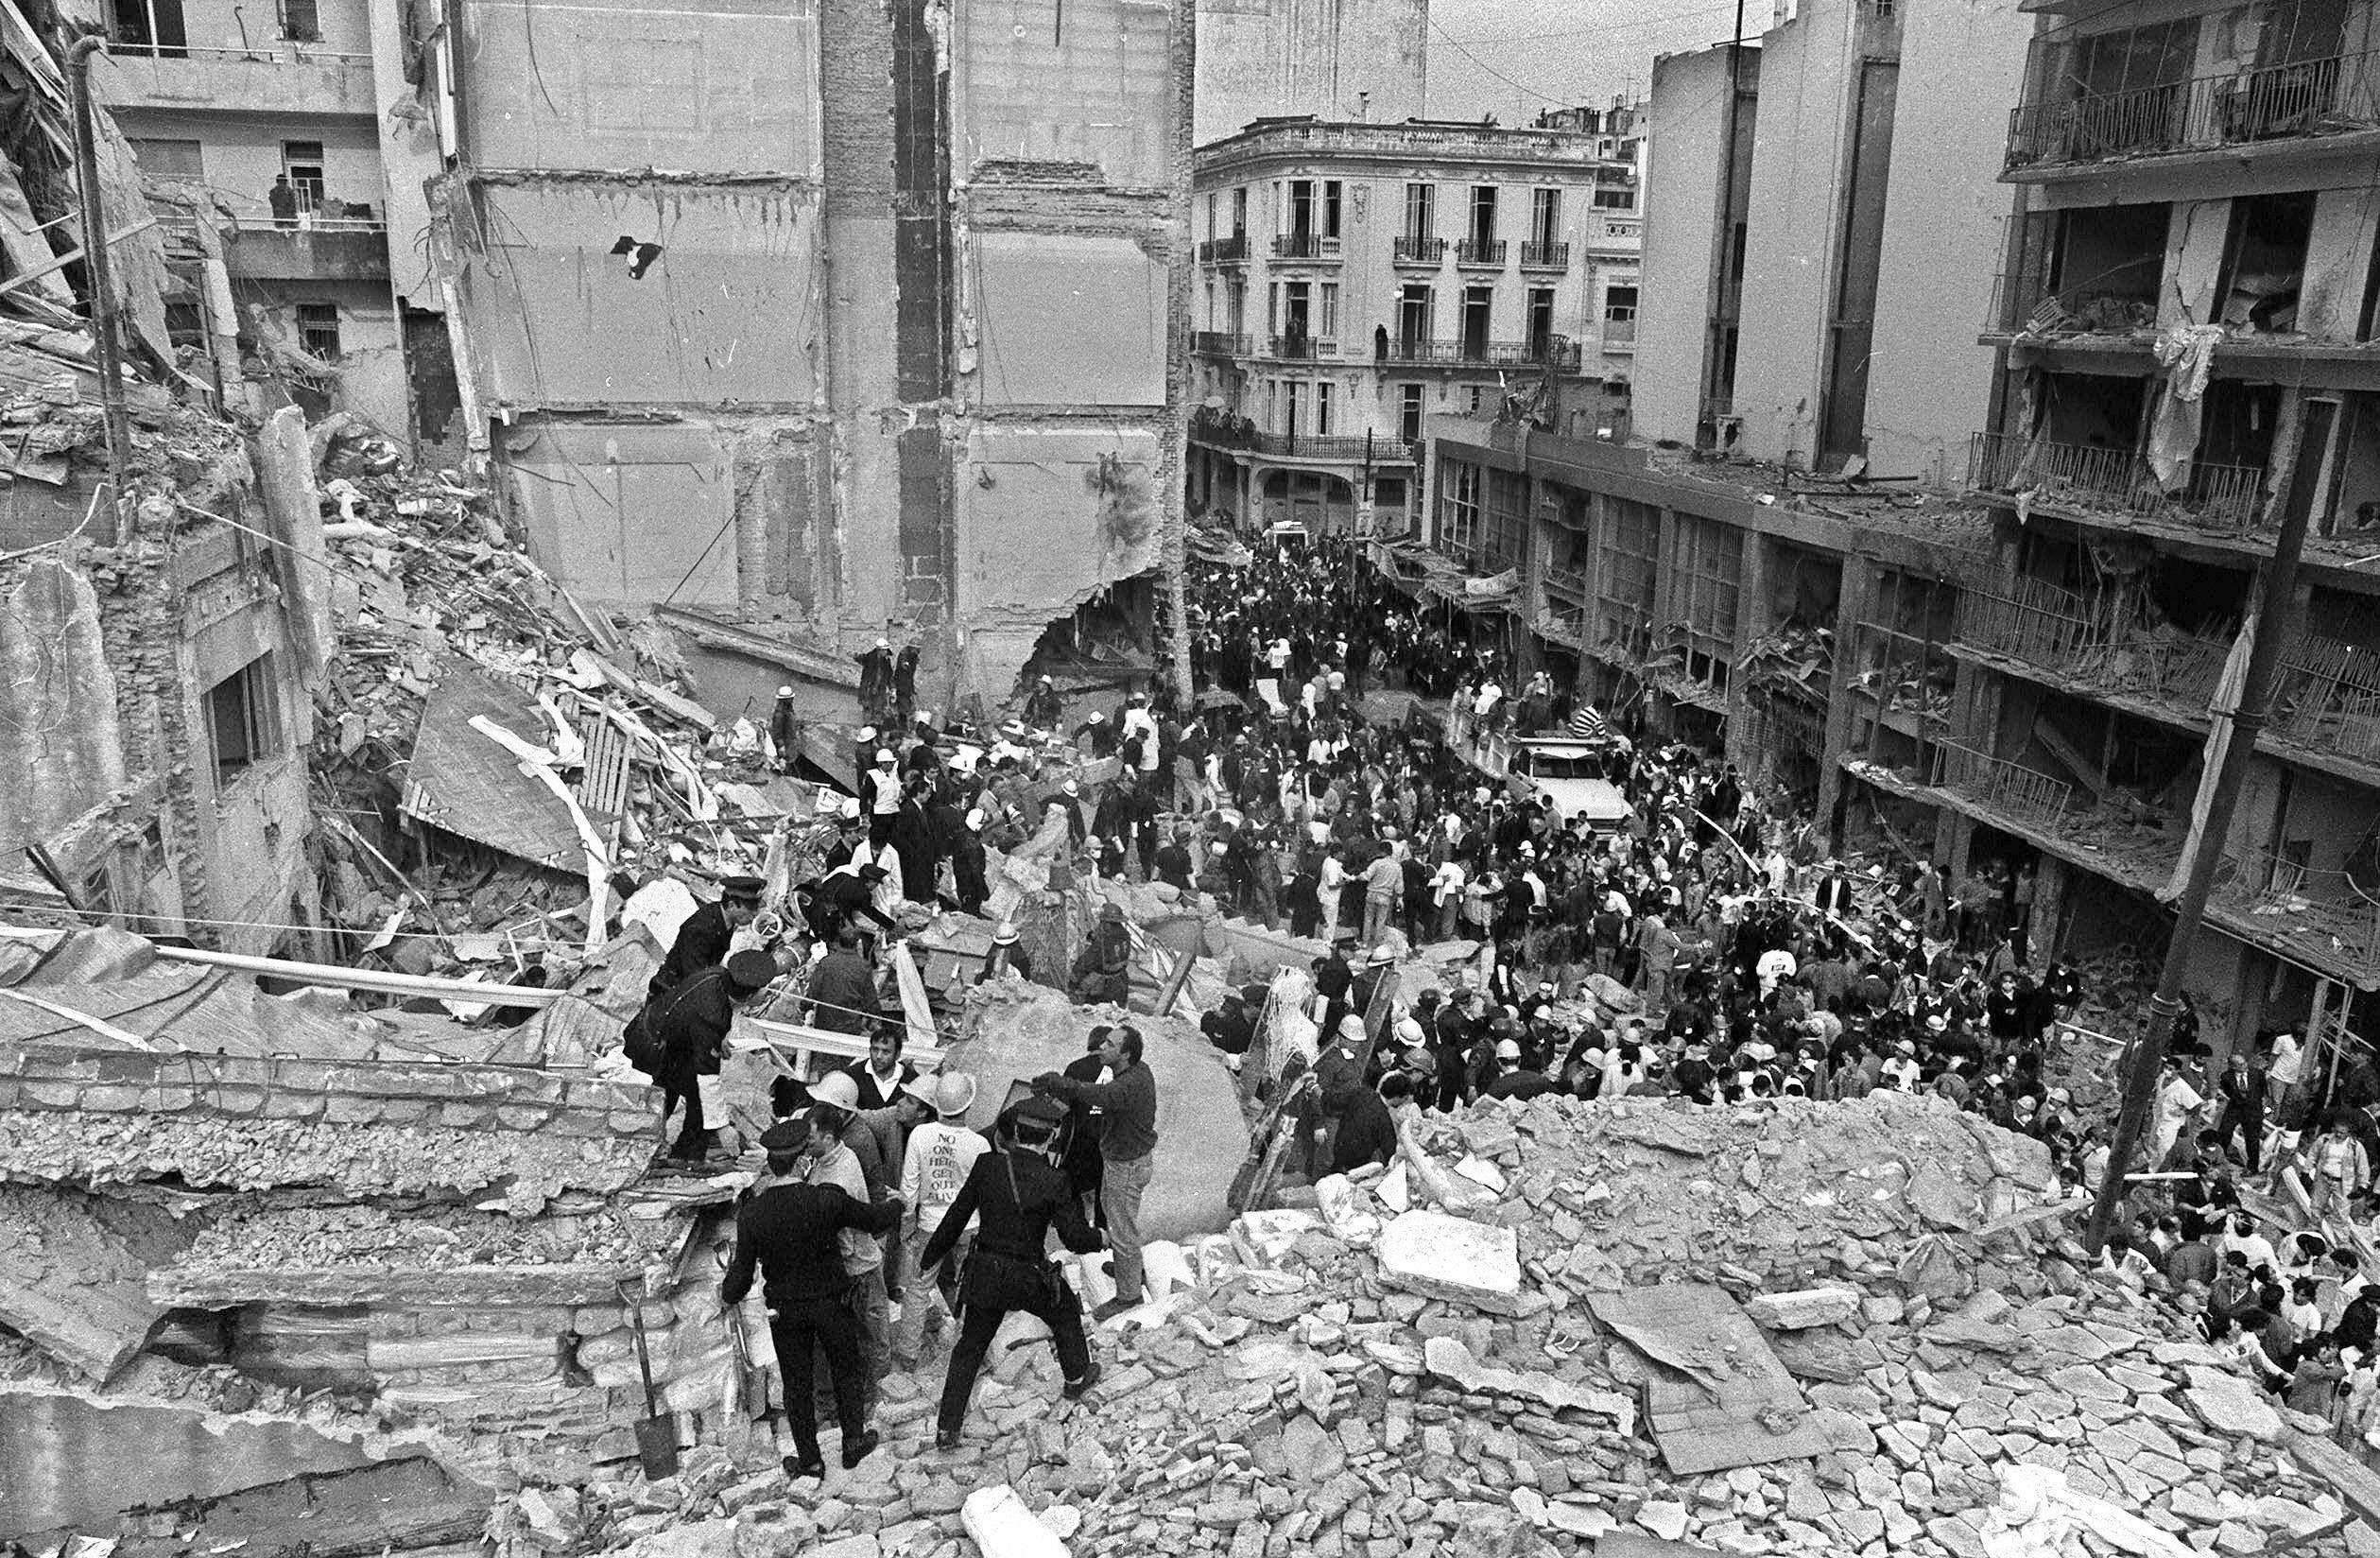 Firemen and policemen search for wounded people after a bomb exploded at the Argentine-Israeli Mutual Association community center in Buenos Aires on July 18, 1994. (ALI BURAFI&mdash;AFP/Getty Images)